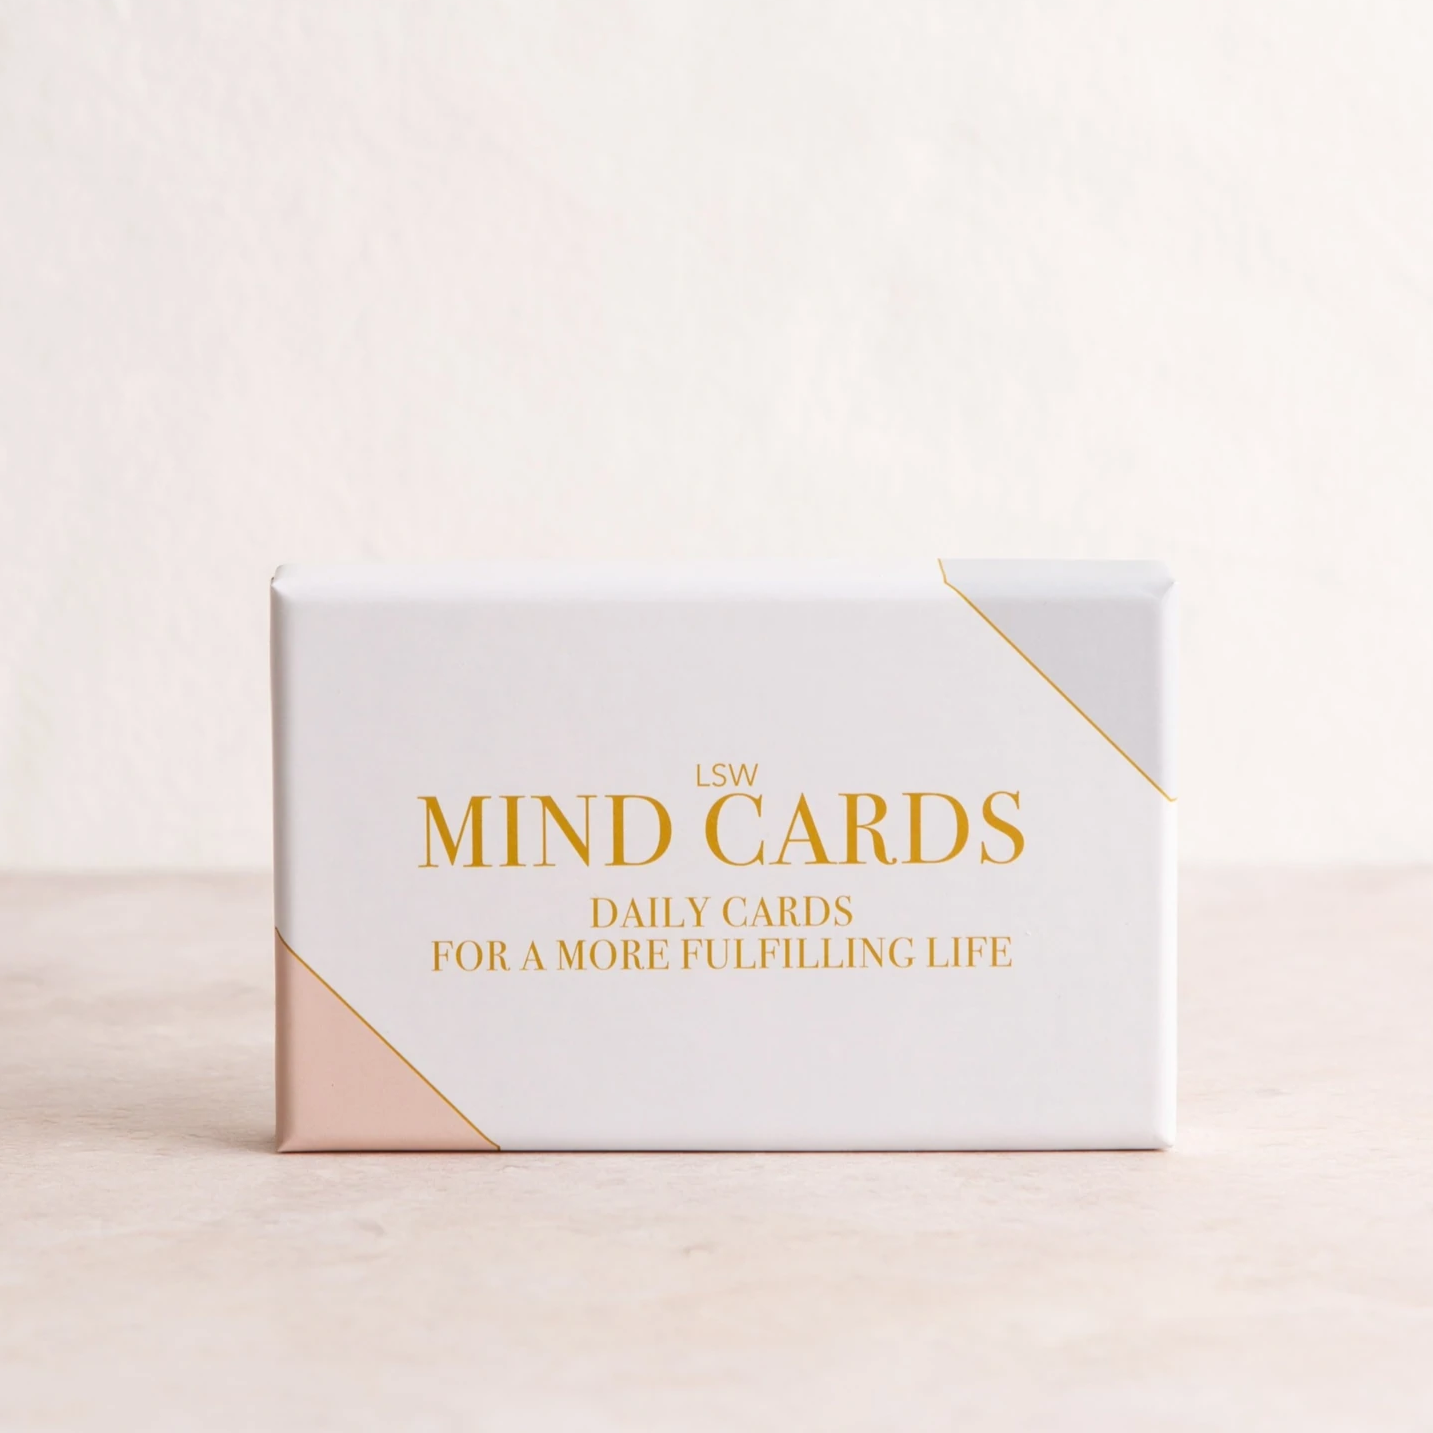 LSW London - Mind Cards